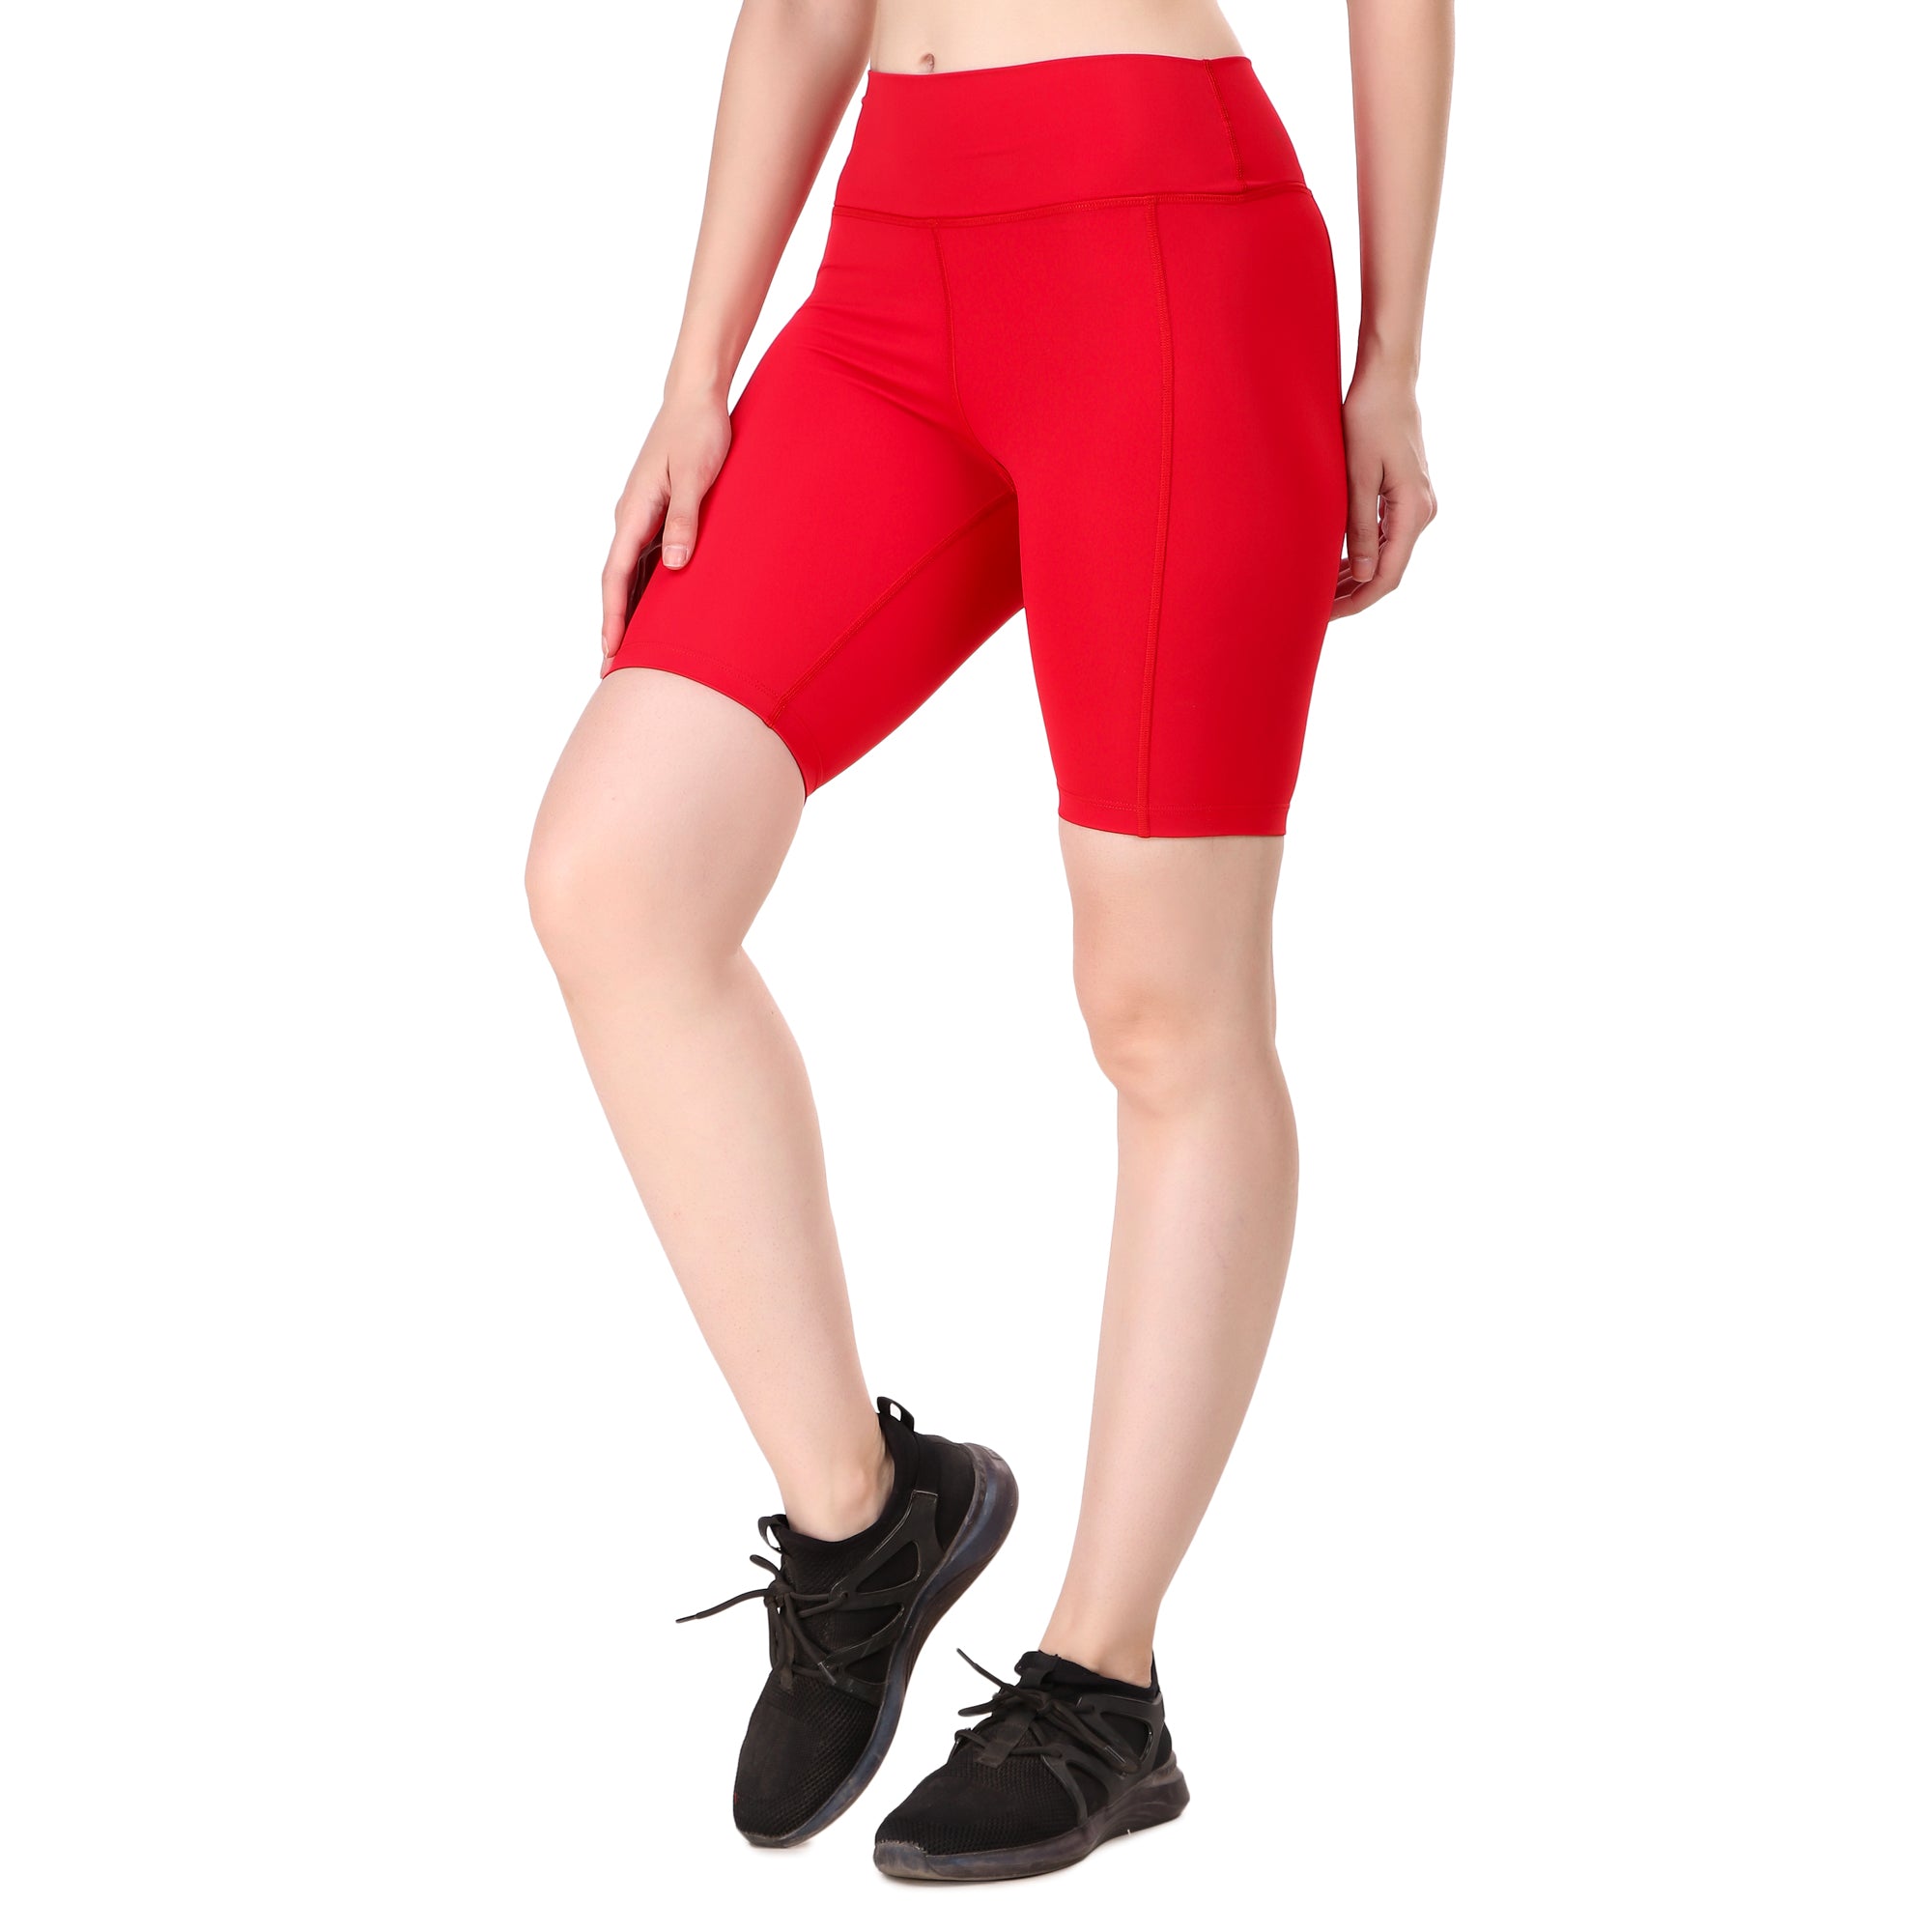 Nylon Compression Shorts For Women (Red)